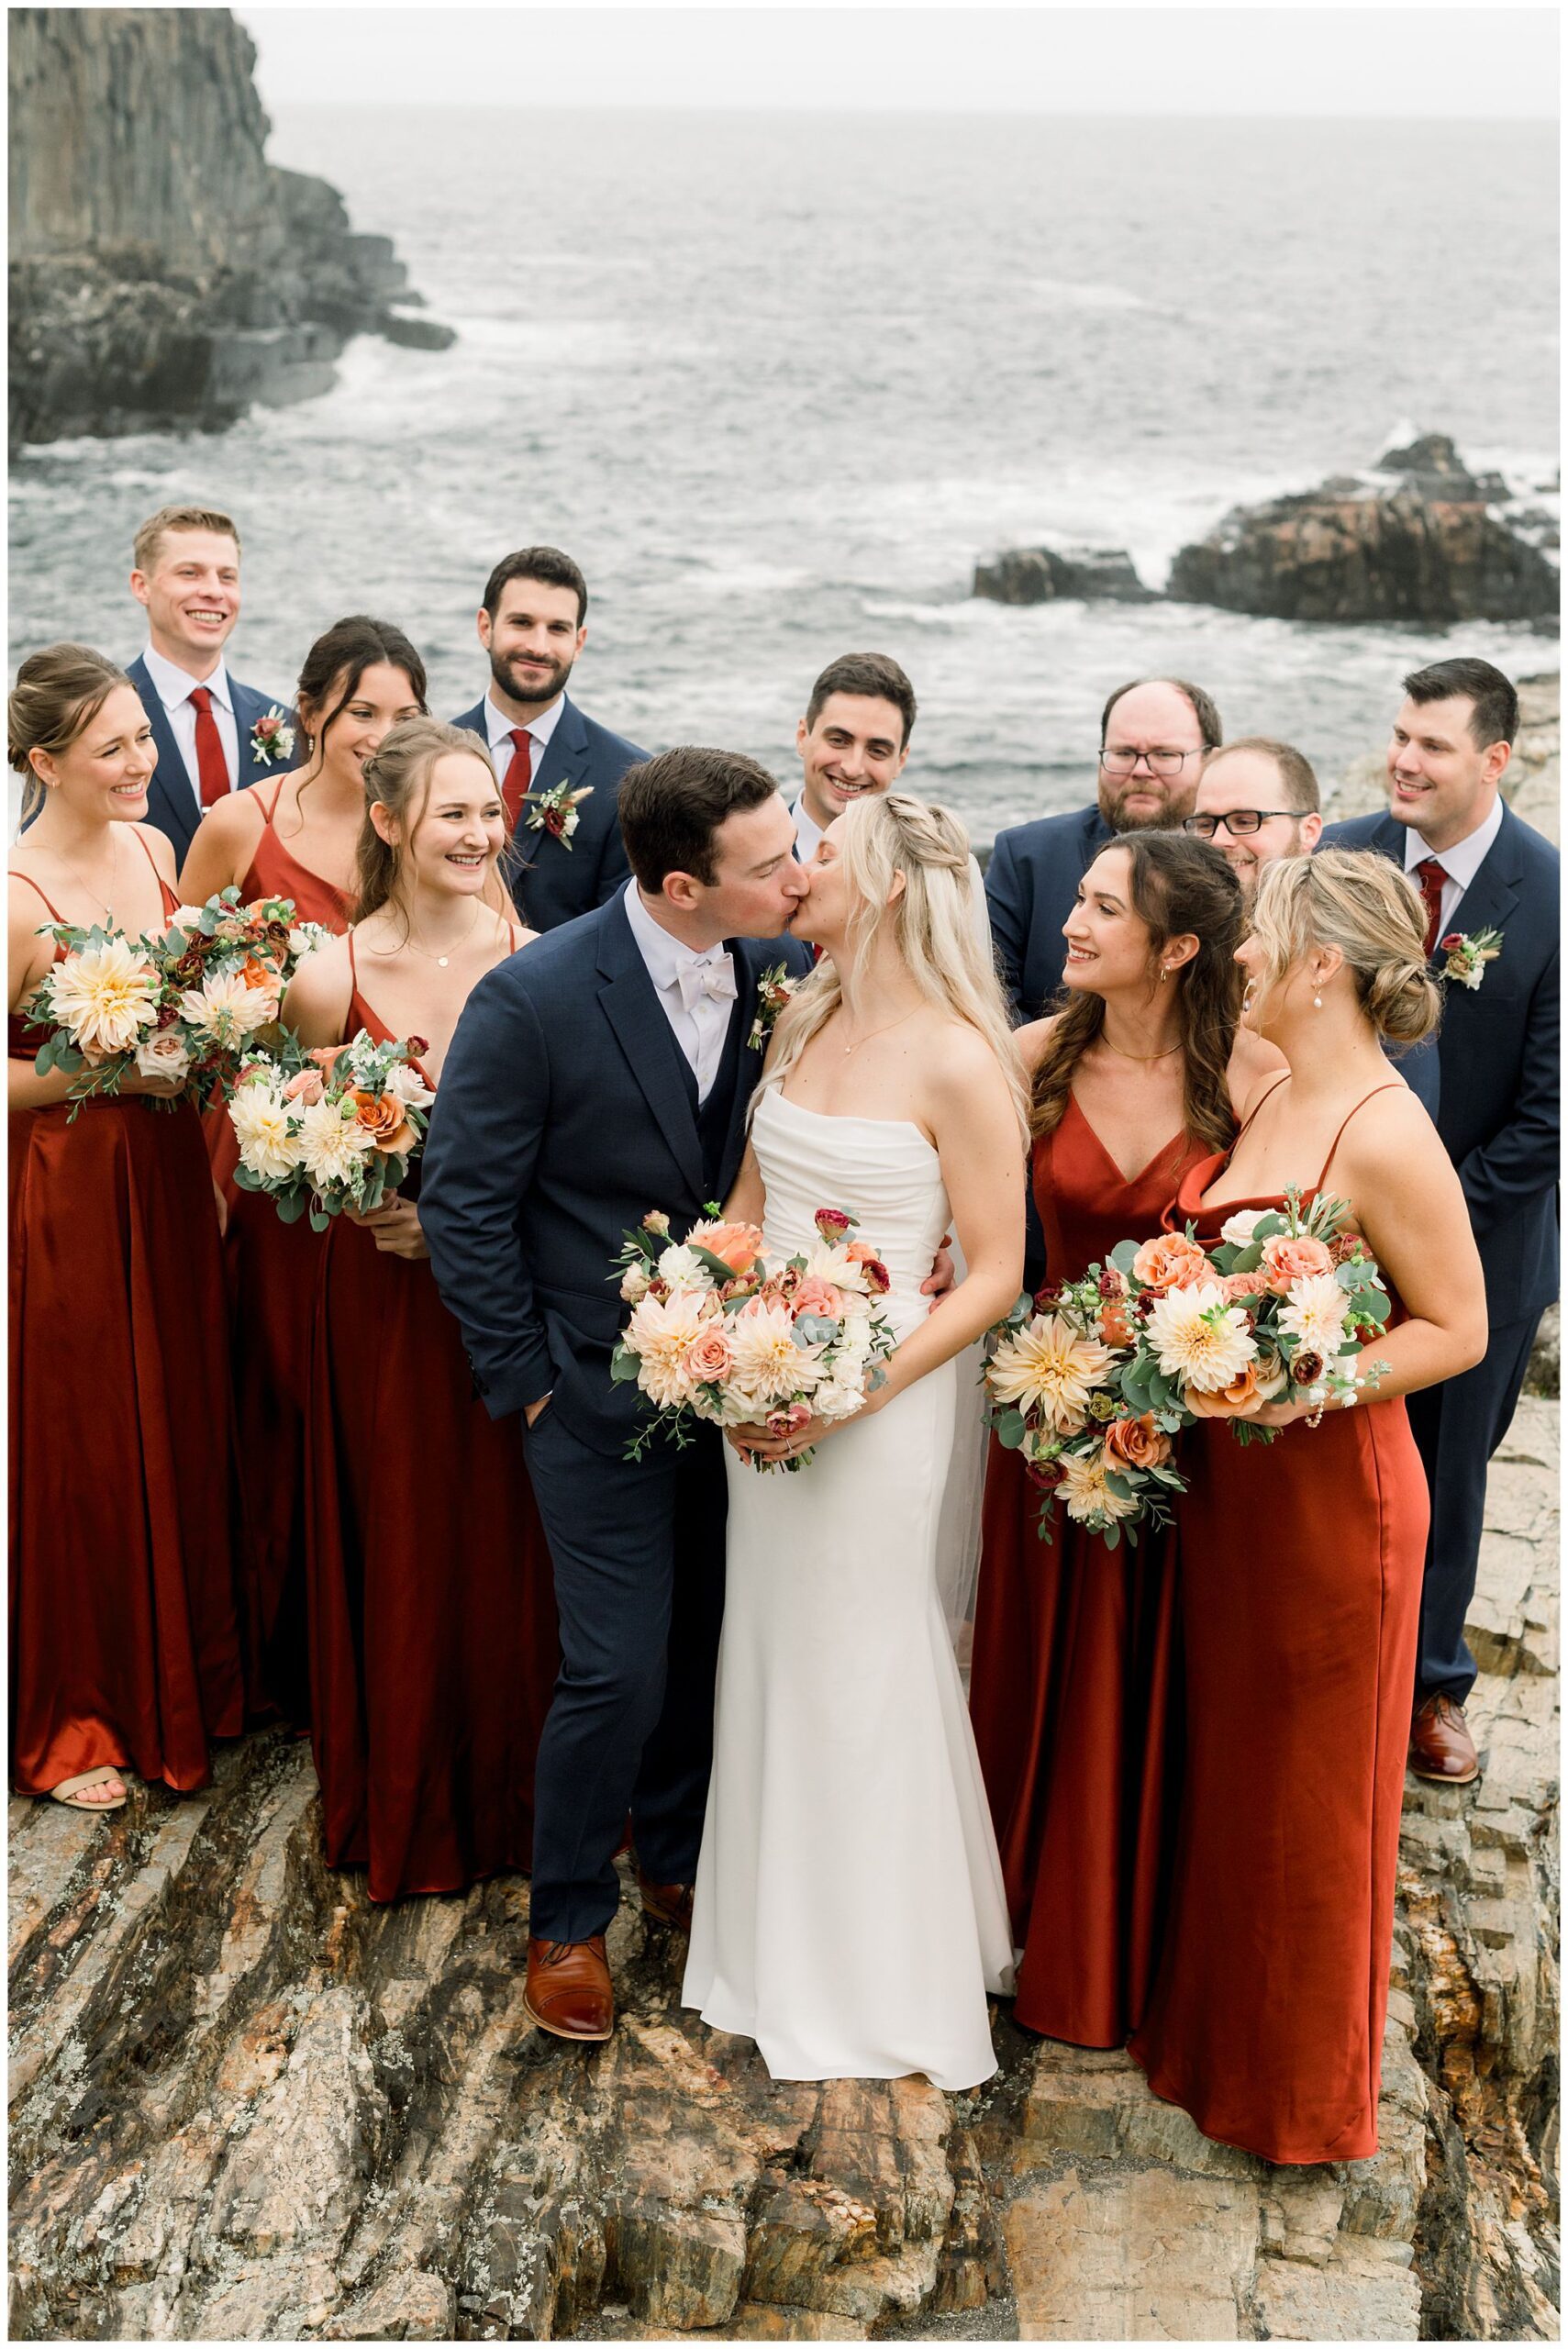 Wedding party photos at Cliff House Maine